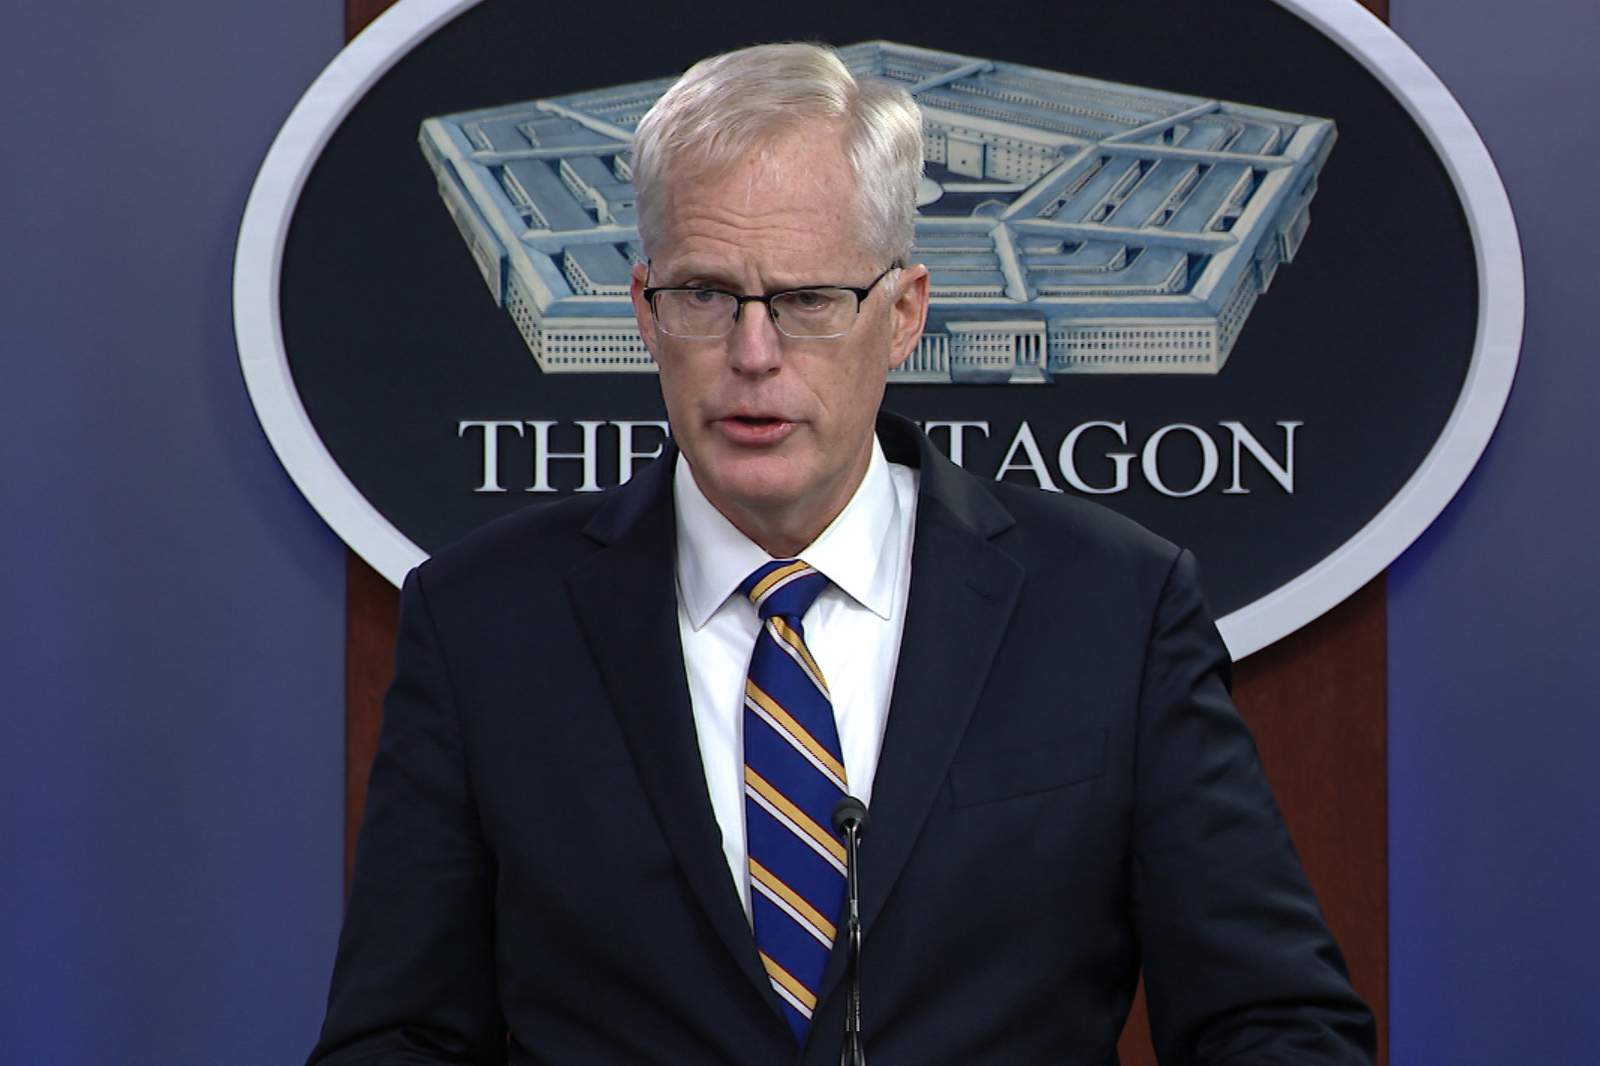 Acting Pentagon chief cites risks during troop reductions